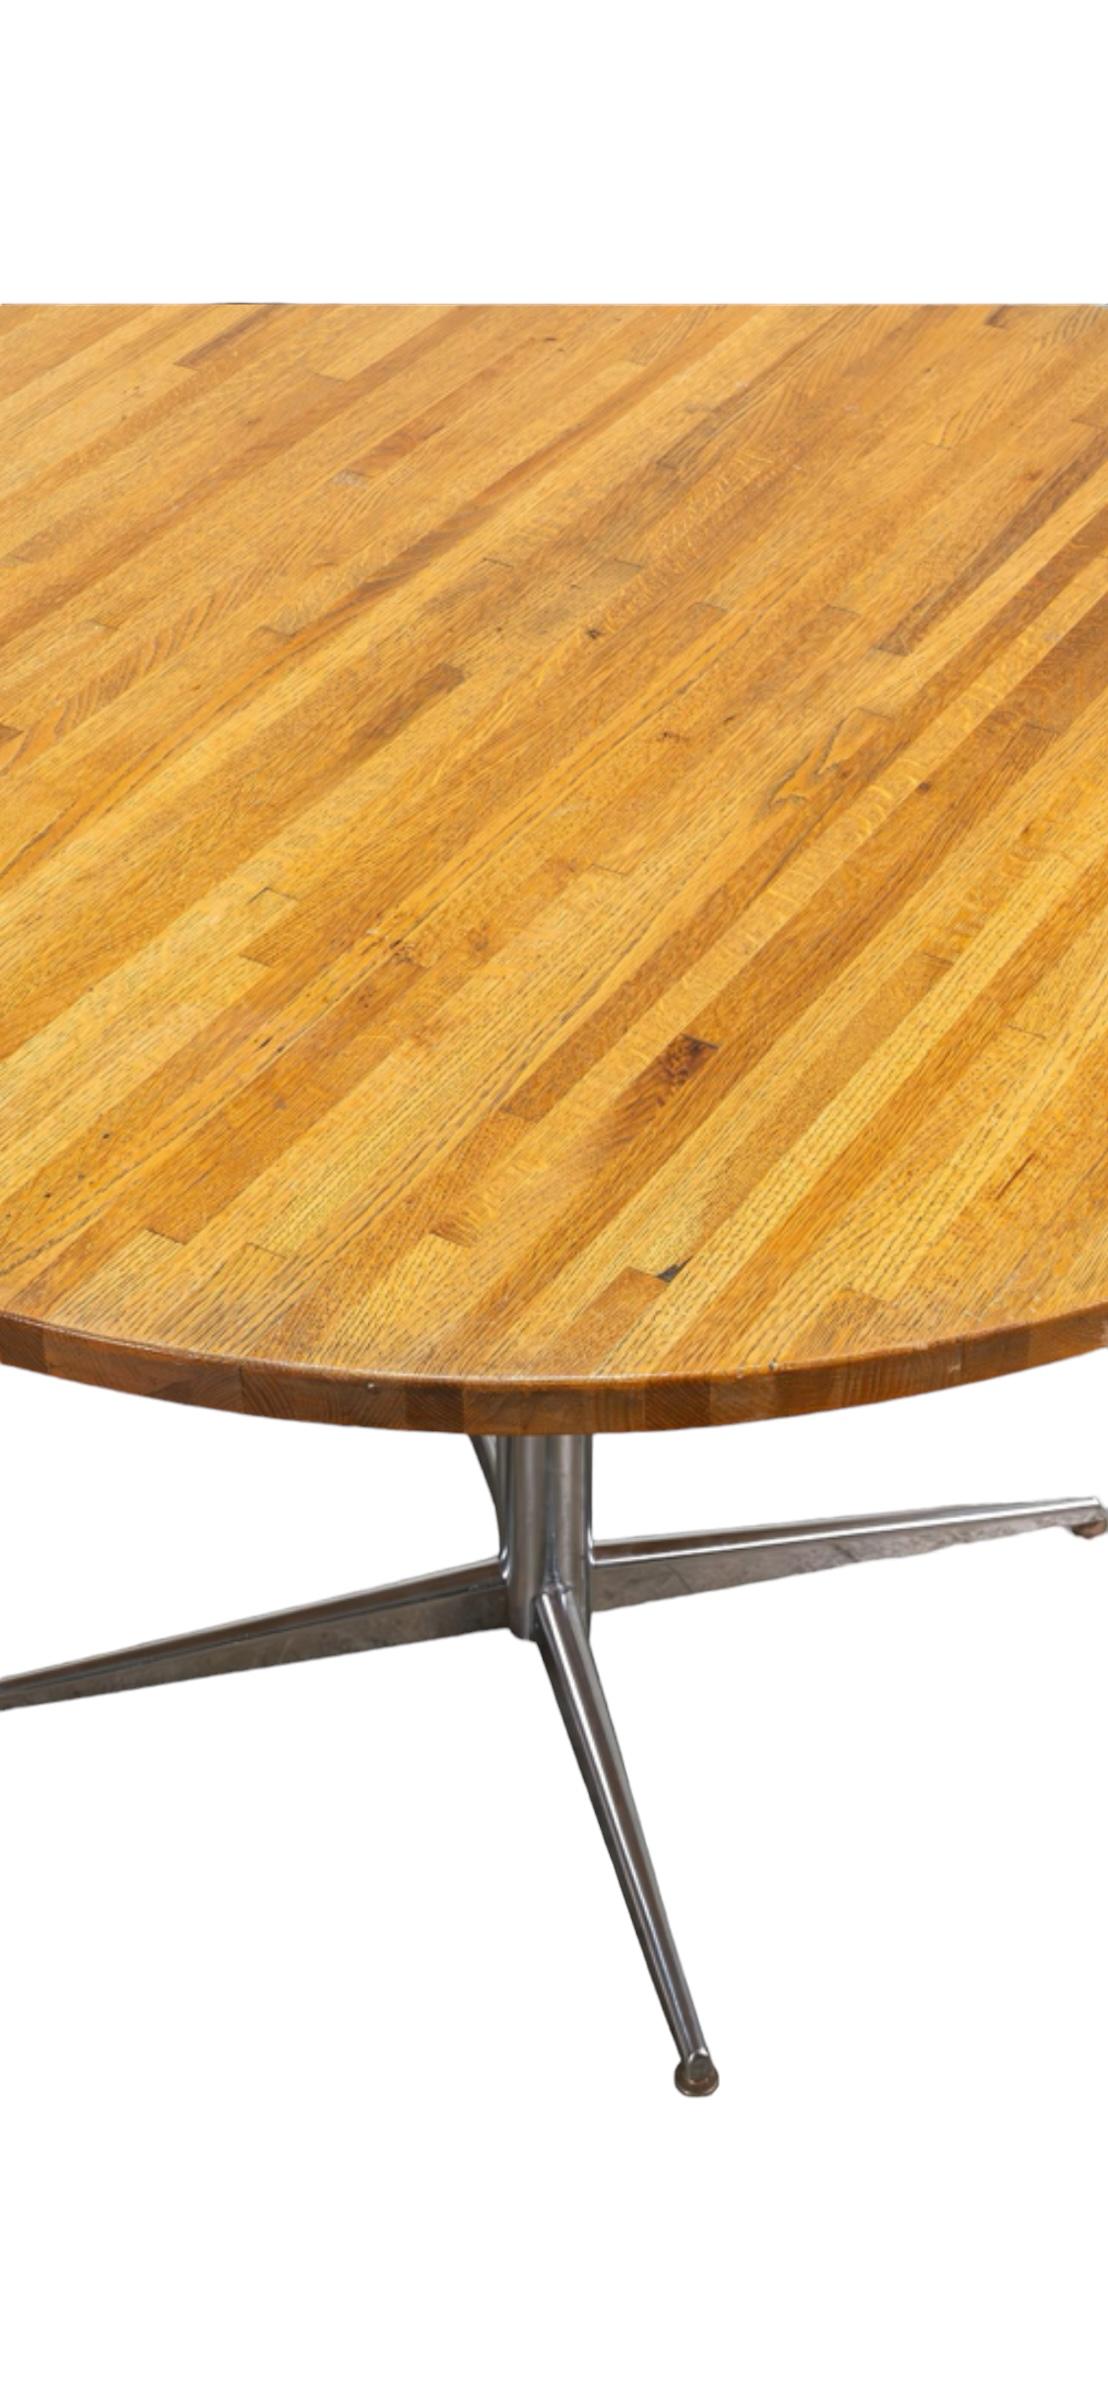 Butcher Block 48 inch Round Kitchen Dining Table In Good Condition For Sale In Brooklyn, NY